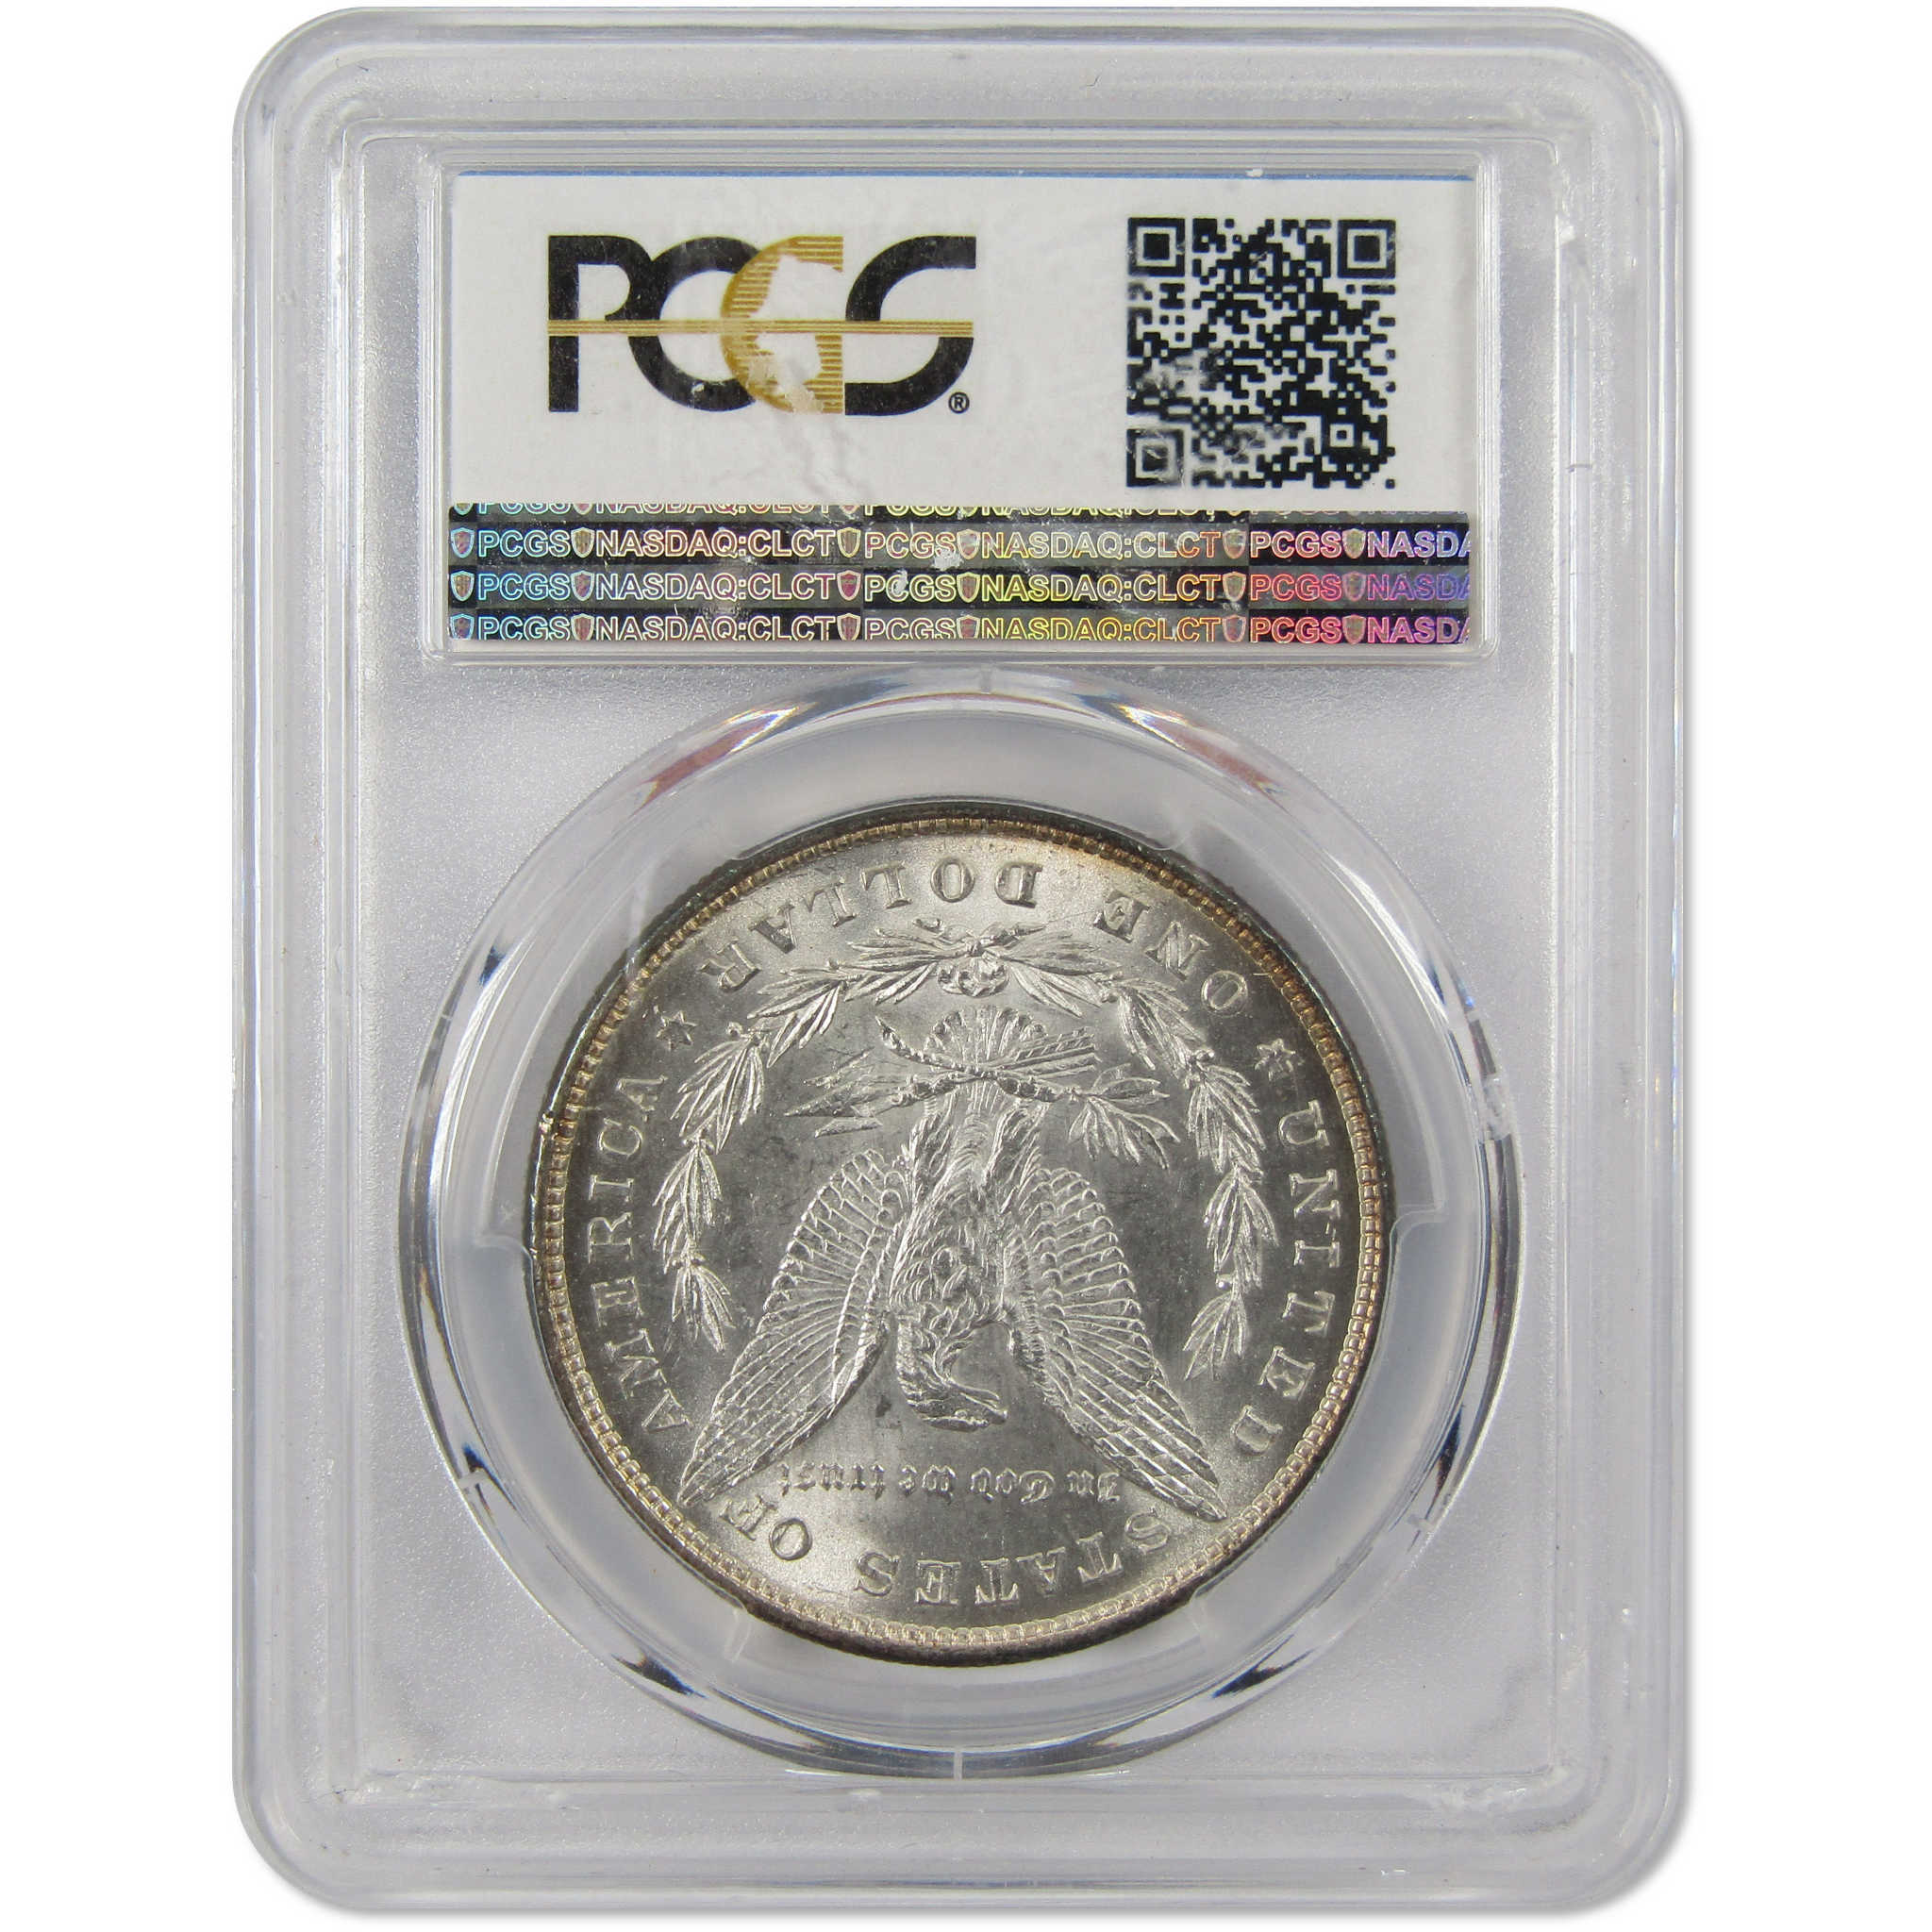 1878 8TF Morgan Dollar MS 62 PCGS 90% Silver $1 Coin SKU:I9733 - Morgan coin - Morgan silver dollar - Morgan silver dollar for sale - Profile Coins &amp; Collectibles